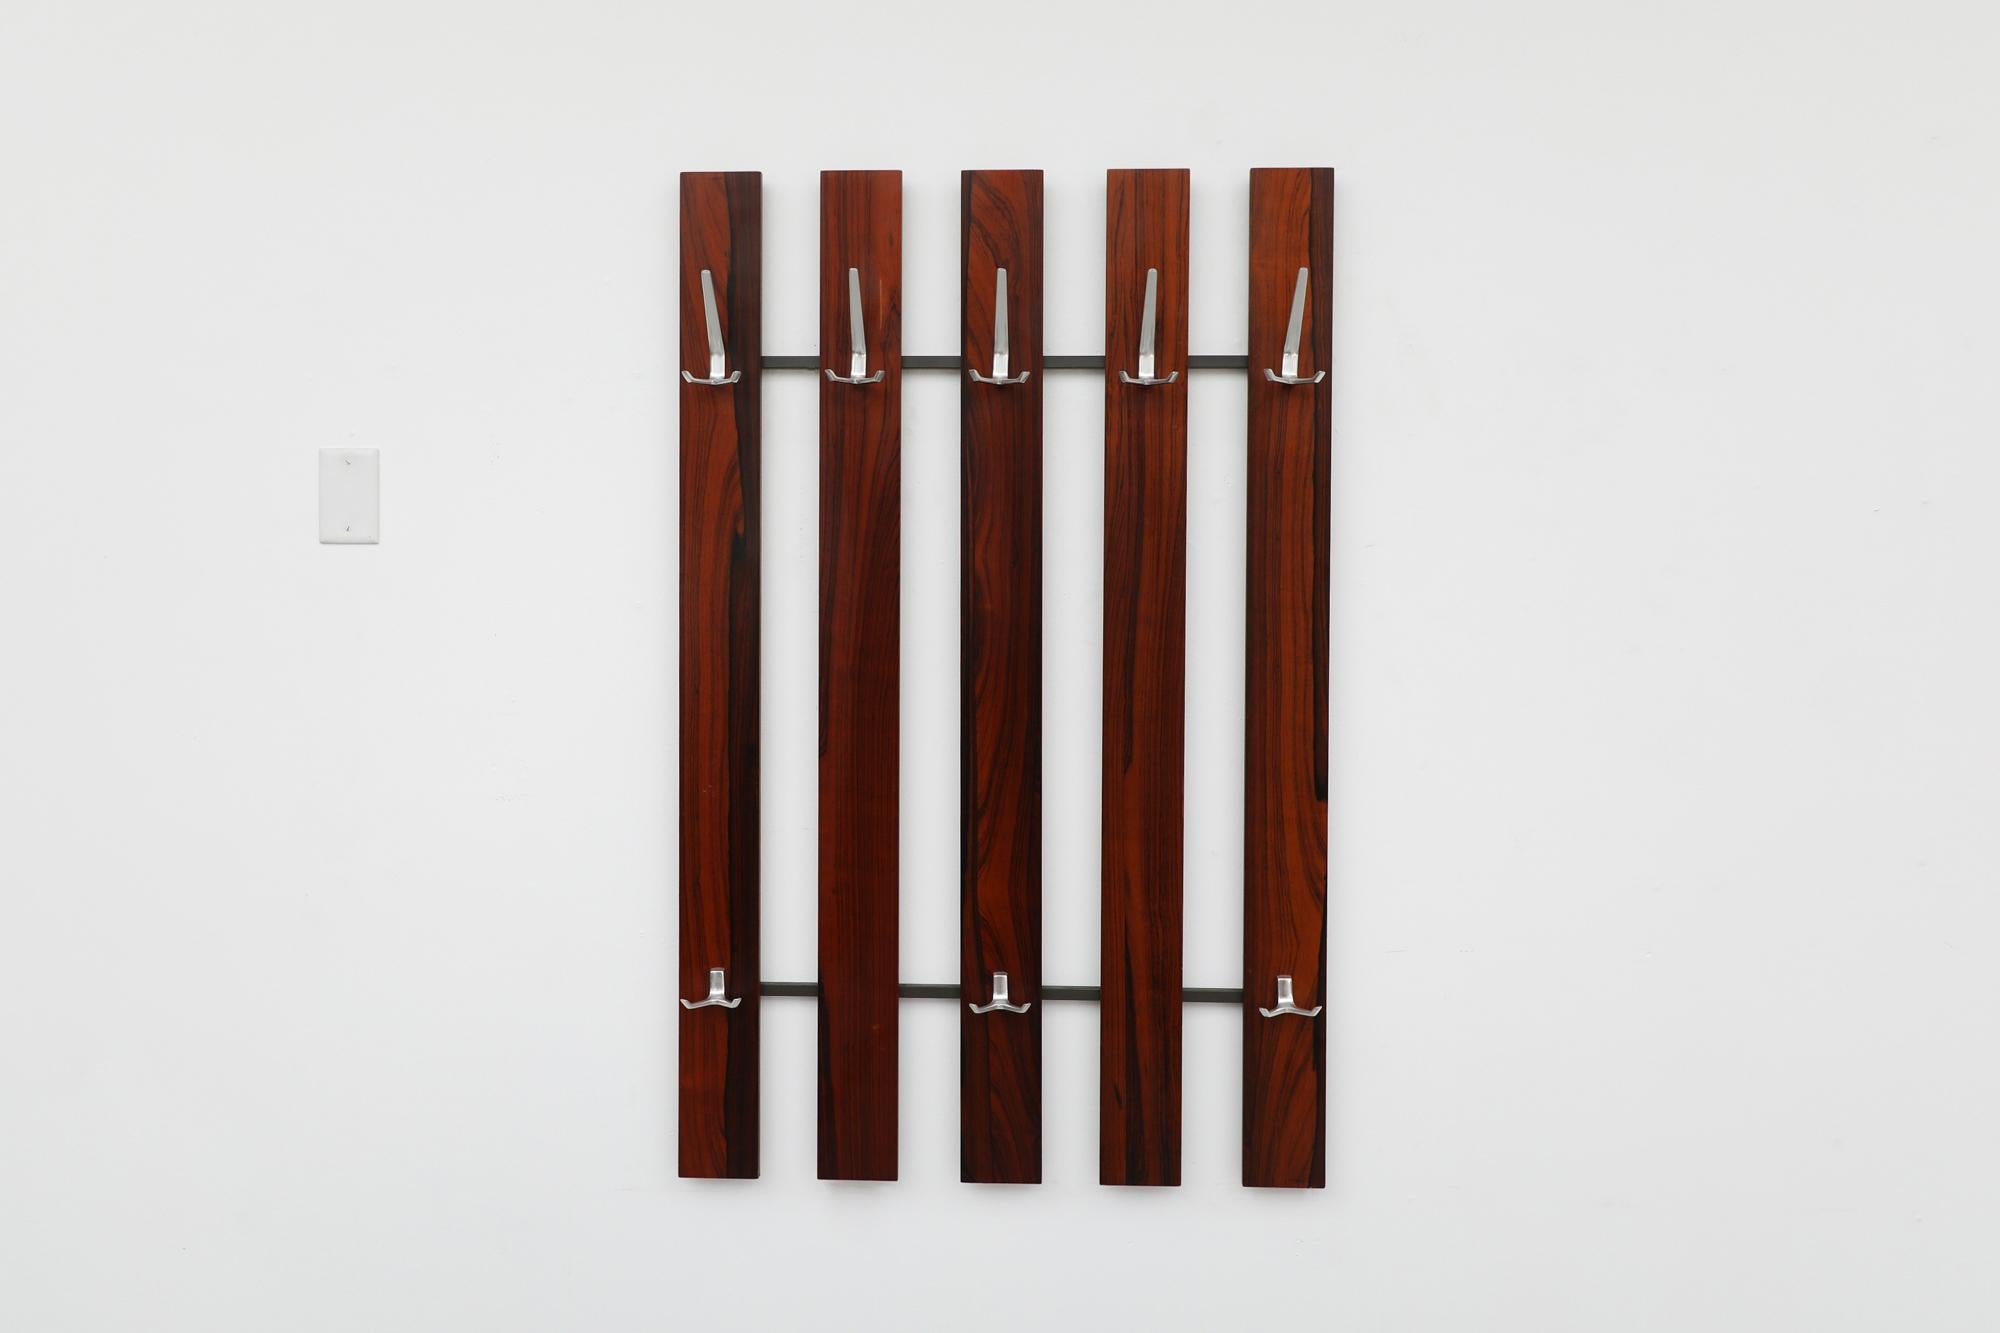 Mid-Century Rosewood wall mounted coat rack with long striped woodgrain pattern. 5 section slats and 8 cast aluminum hooks. In original condition with minimal wear and scratching. Similar coat racks also available and listed separately.